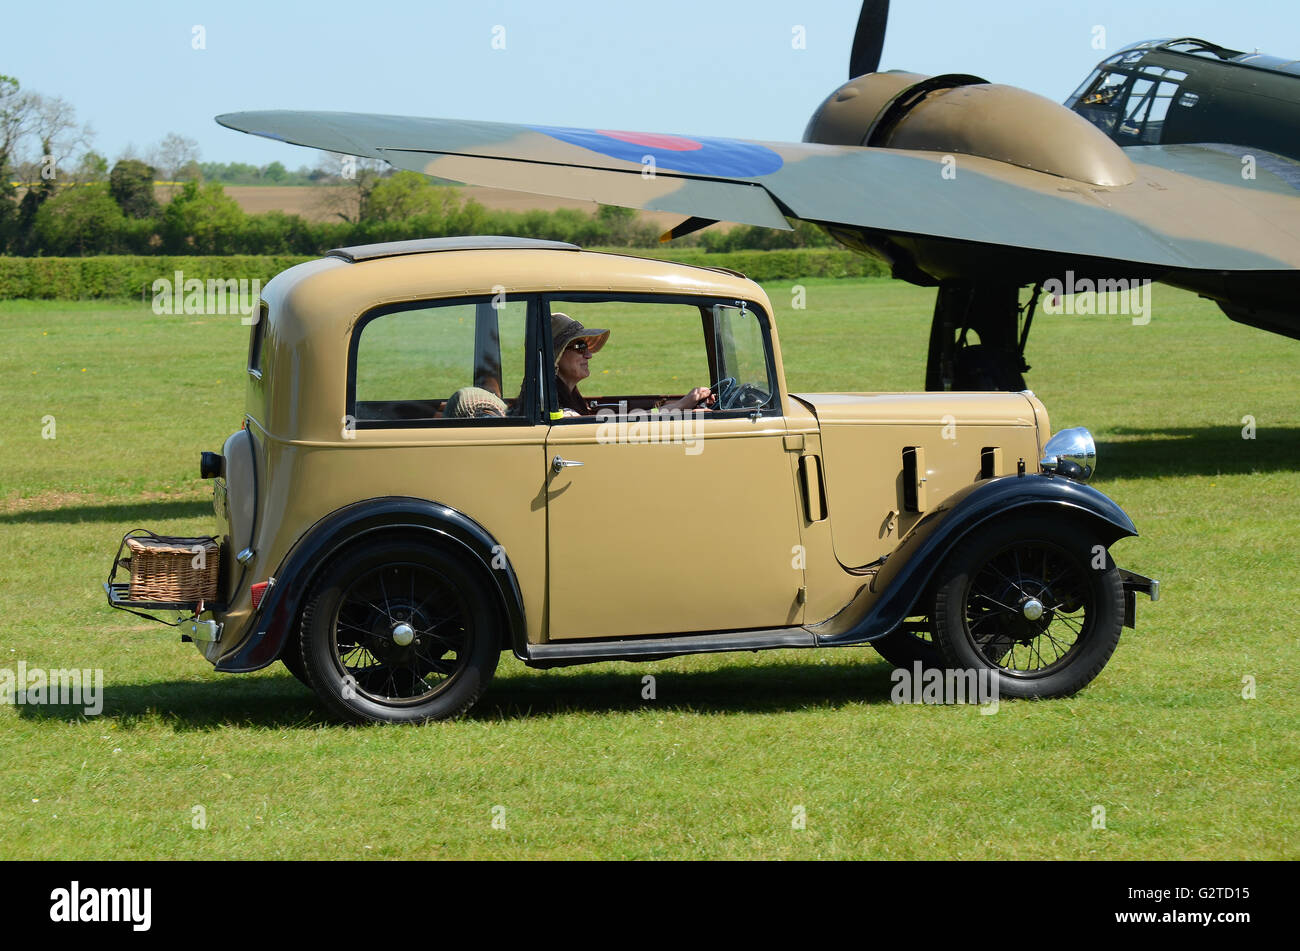 Austin 7 is an economy car that was produced from 1922 until 1939 in the UK by Austin. Driven here by Carol de Solla Atkin Stock Photo